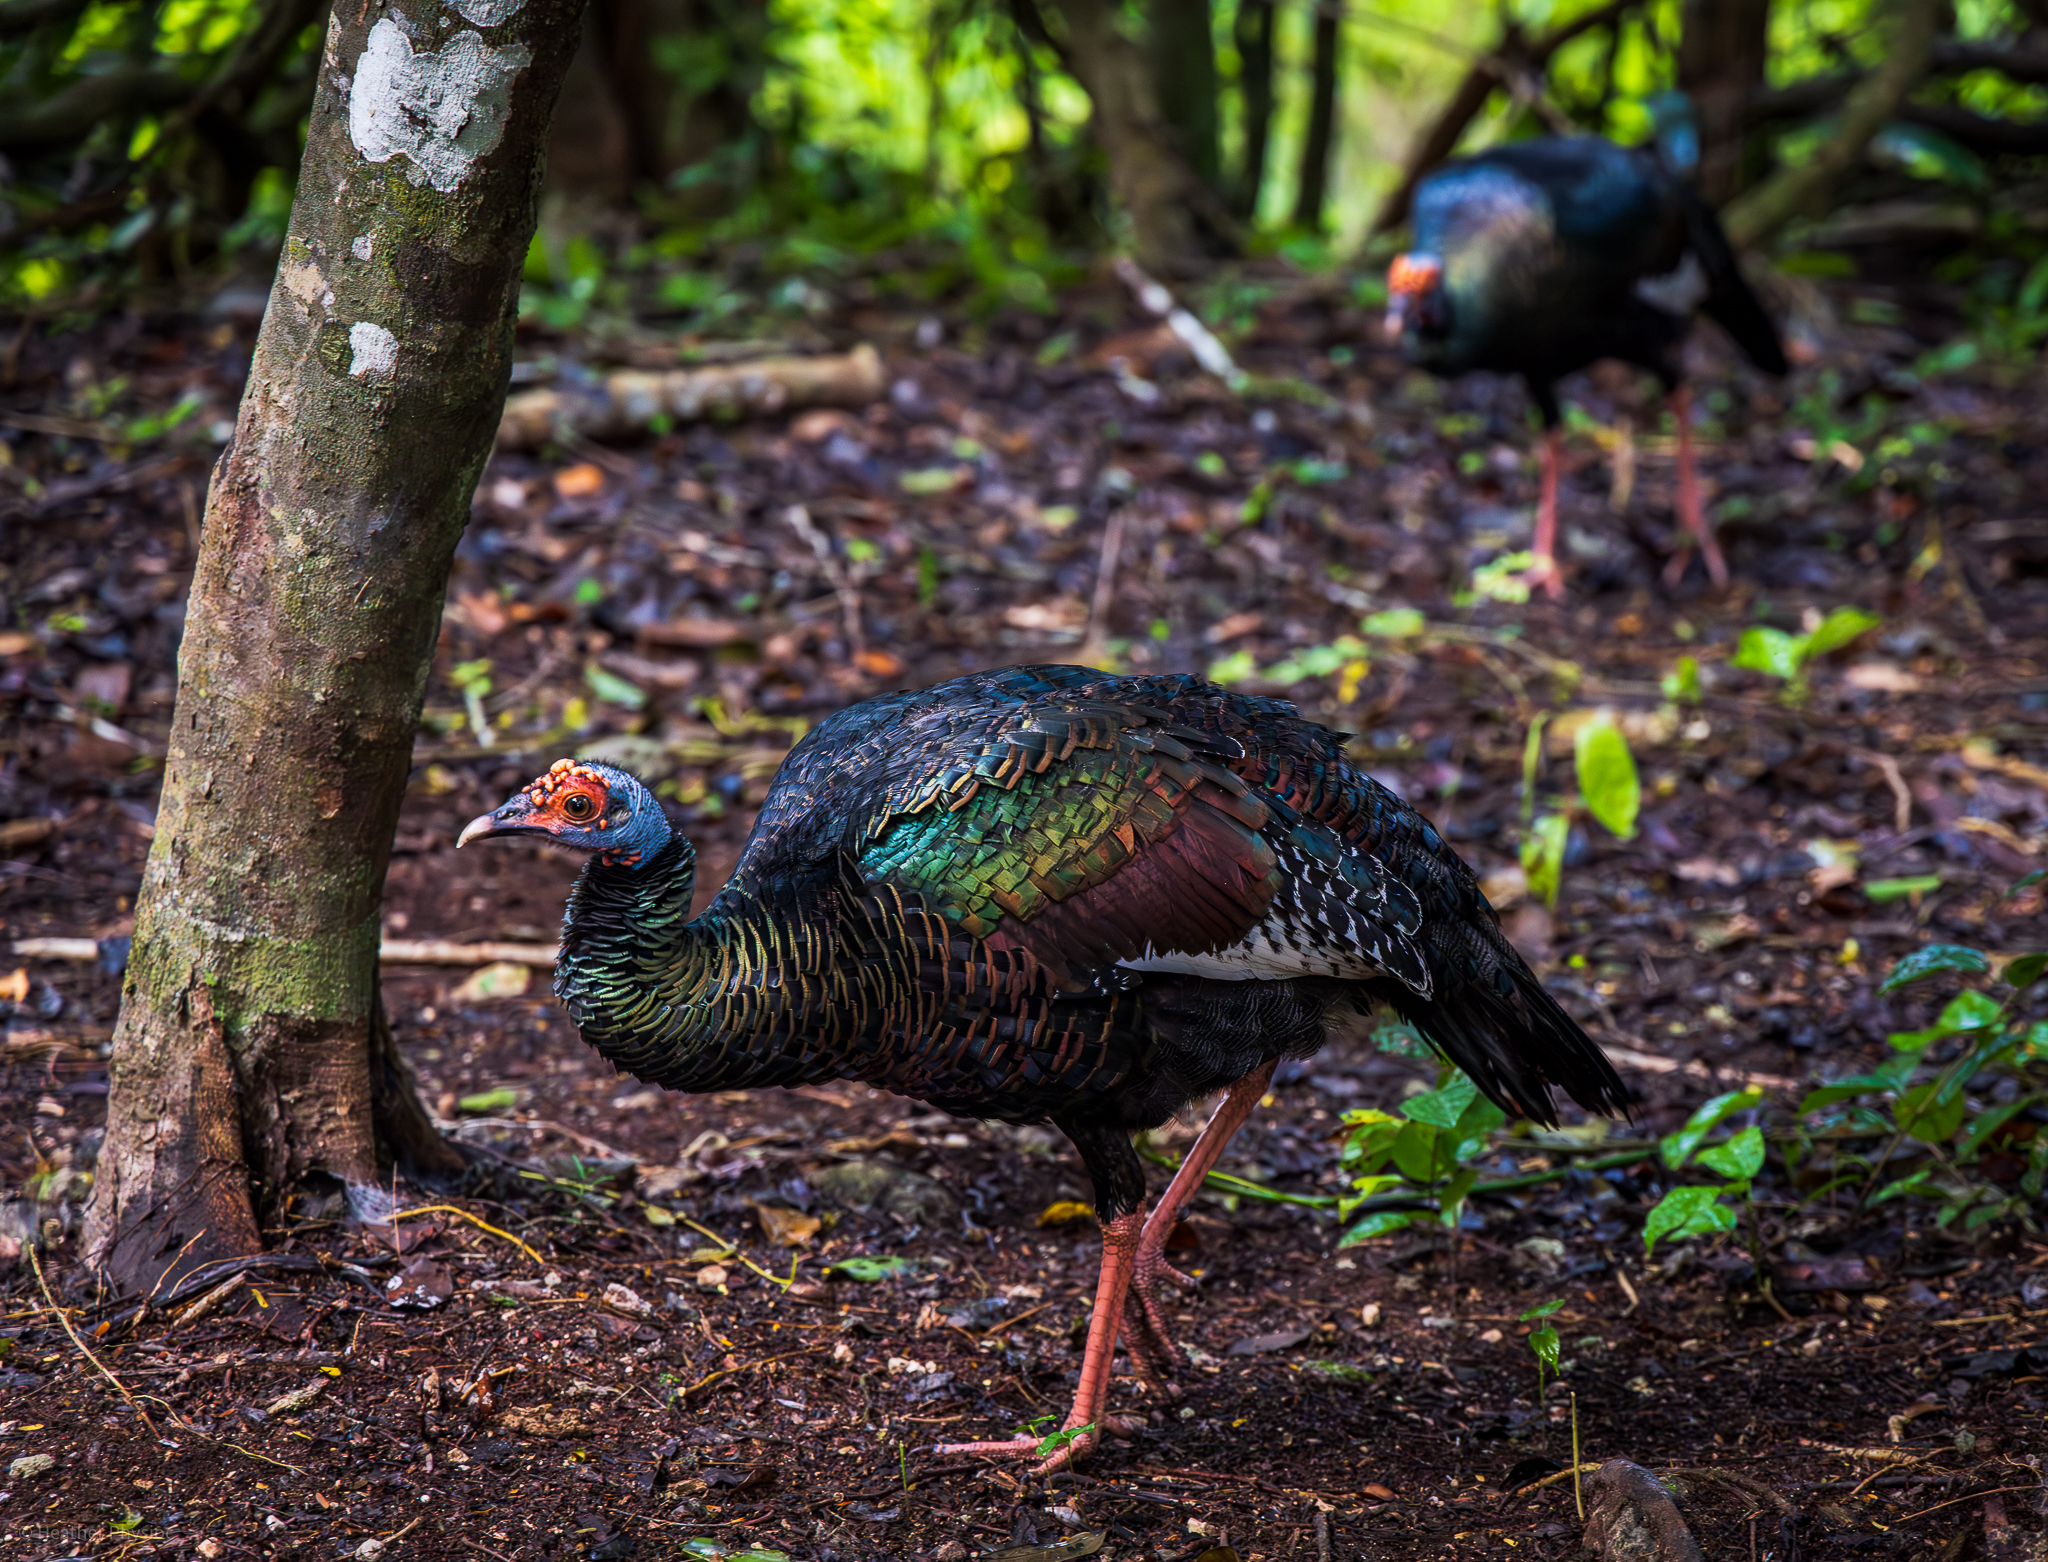 A pair of vibrant ocellated turkeys, with iridescent plumage, foraging on the forest floor, showcasing the biodiversity that thrives alongside the ruins in Coba, Mexico